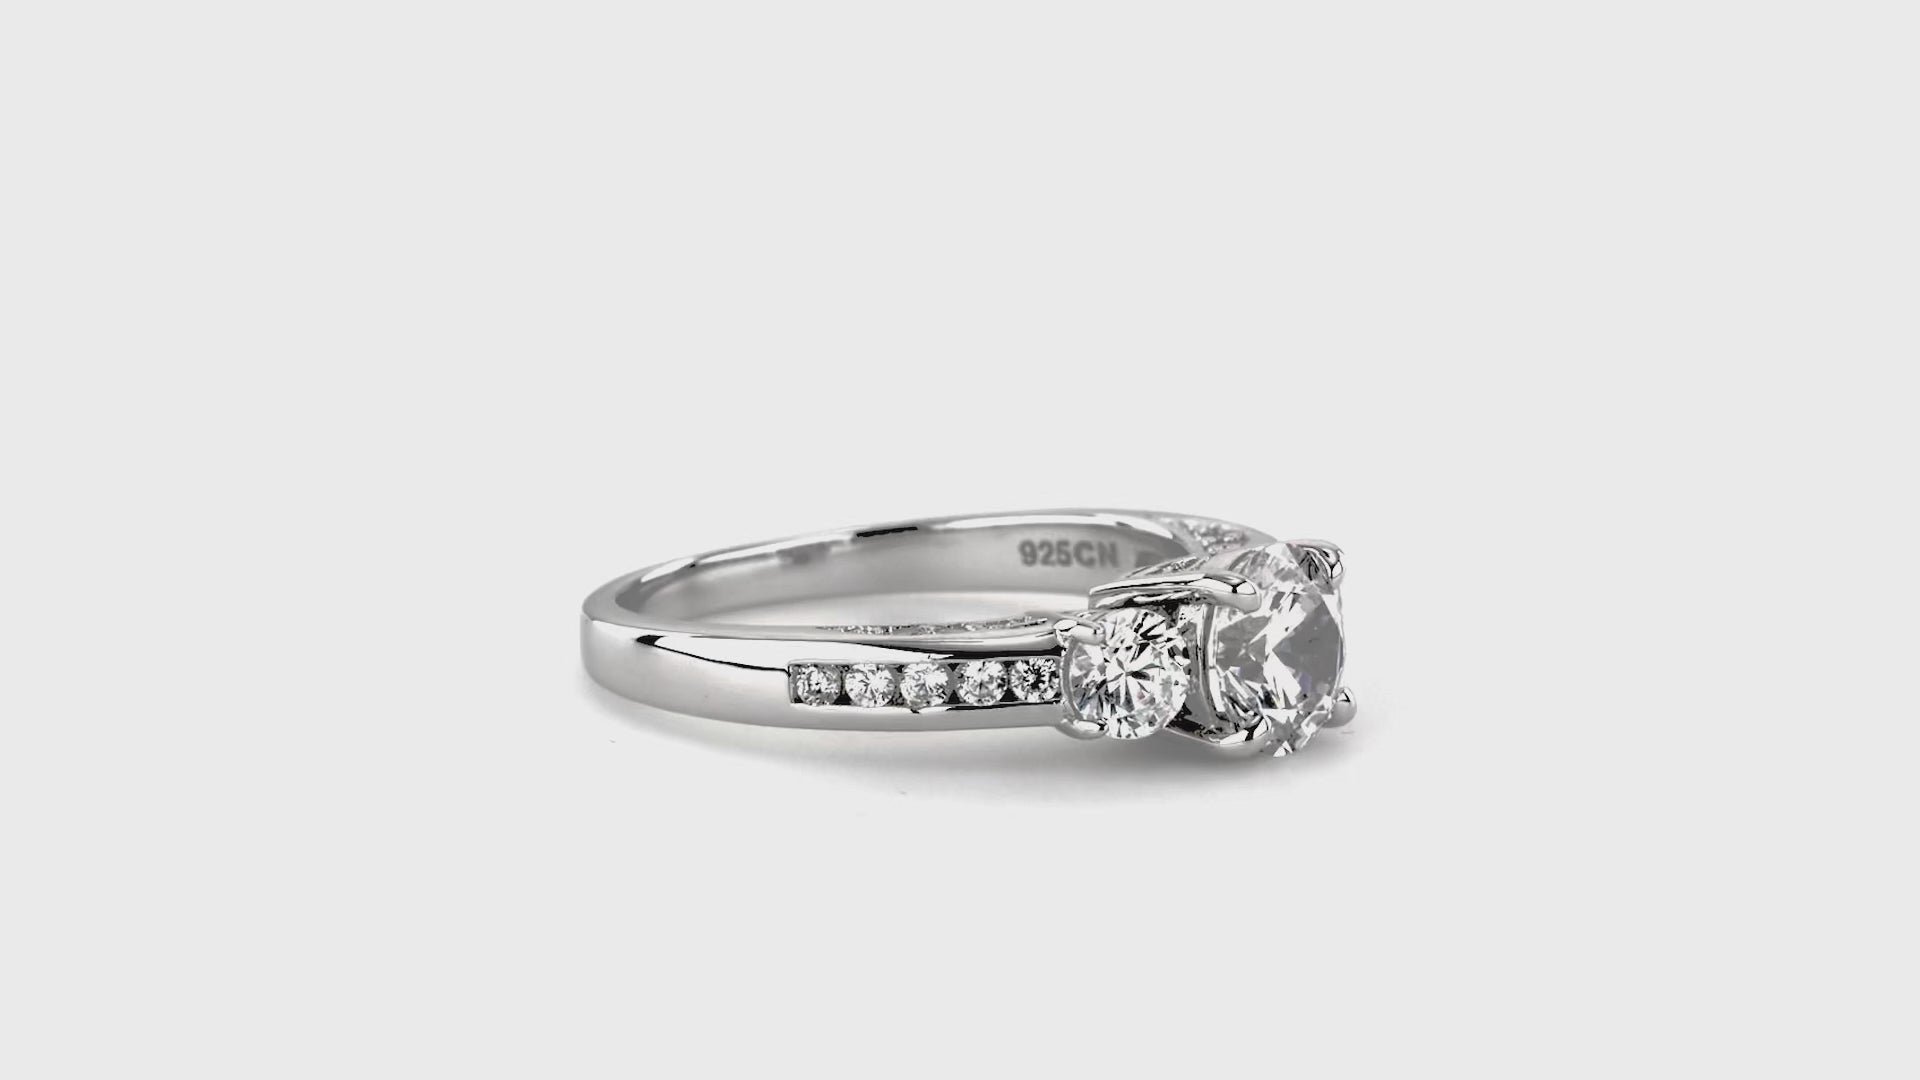 Video Contains 3-Stone Round CZ Ring Set in Sterling Silver. Style Number VR324-02